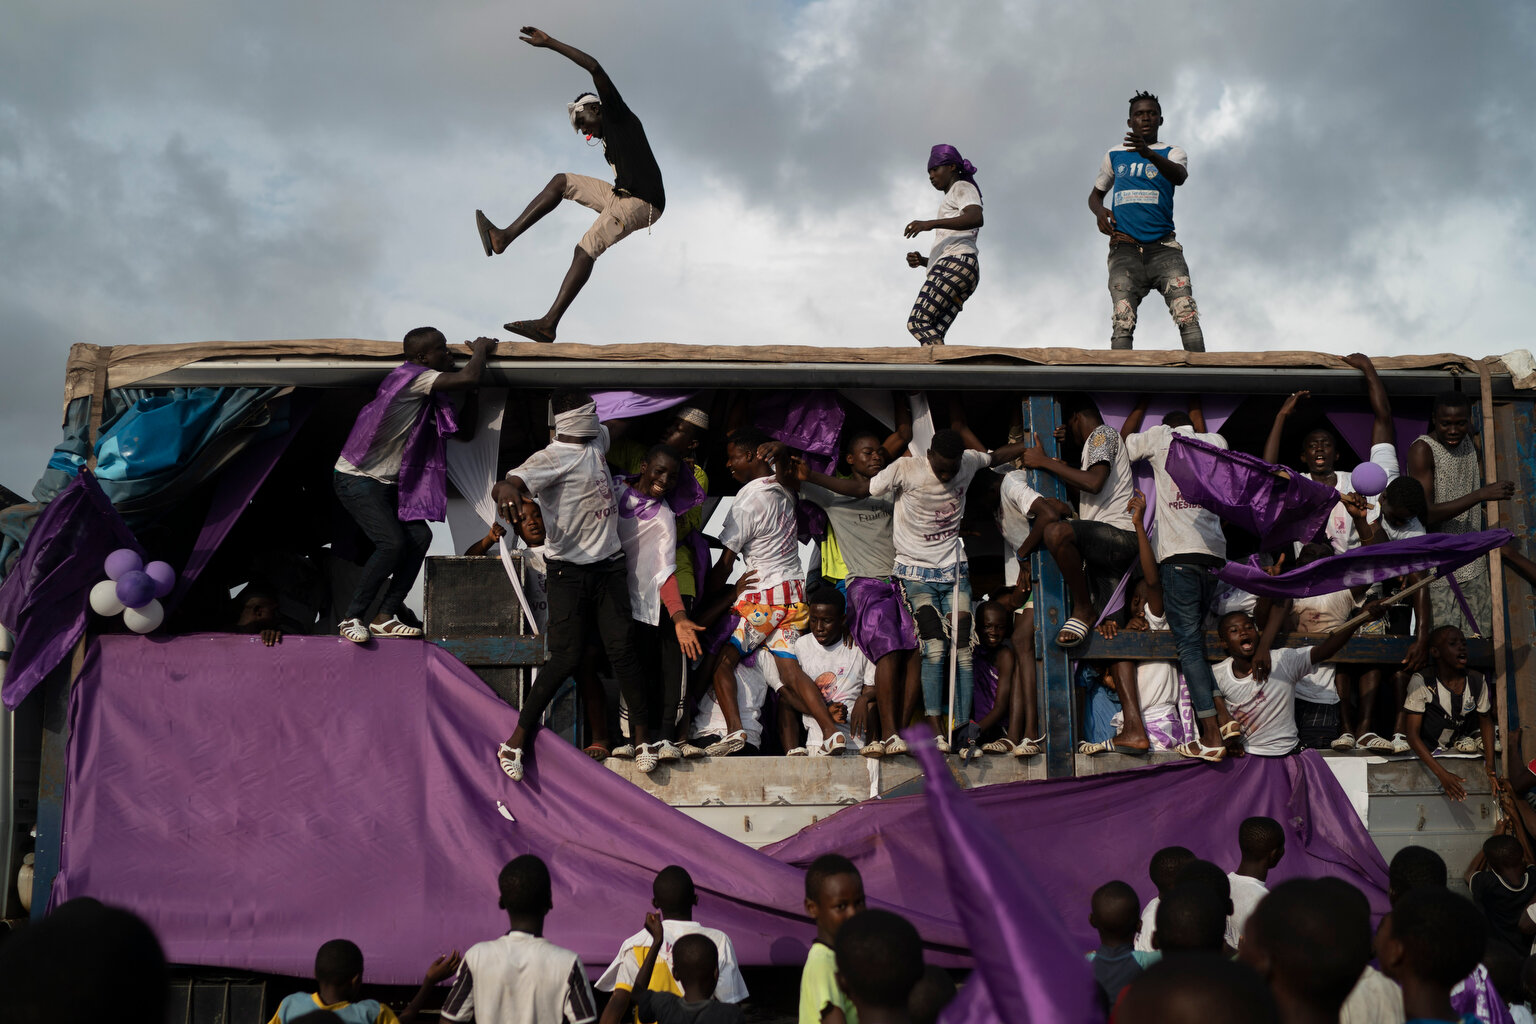  Supporters of the presidential candidate Kouadio Konan Bertin, dance over a sound truck during the final campaign rally in Abidjan, Ivory Coast, Thursday, Oct. 29, 2020. (AP Photo/Leo Correa) 